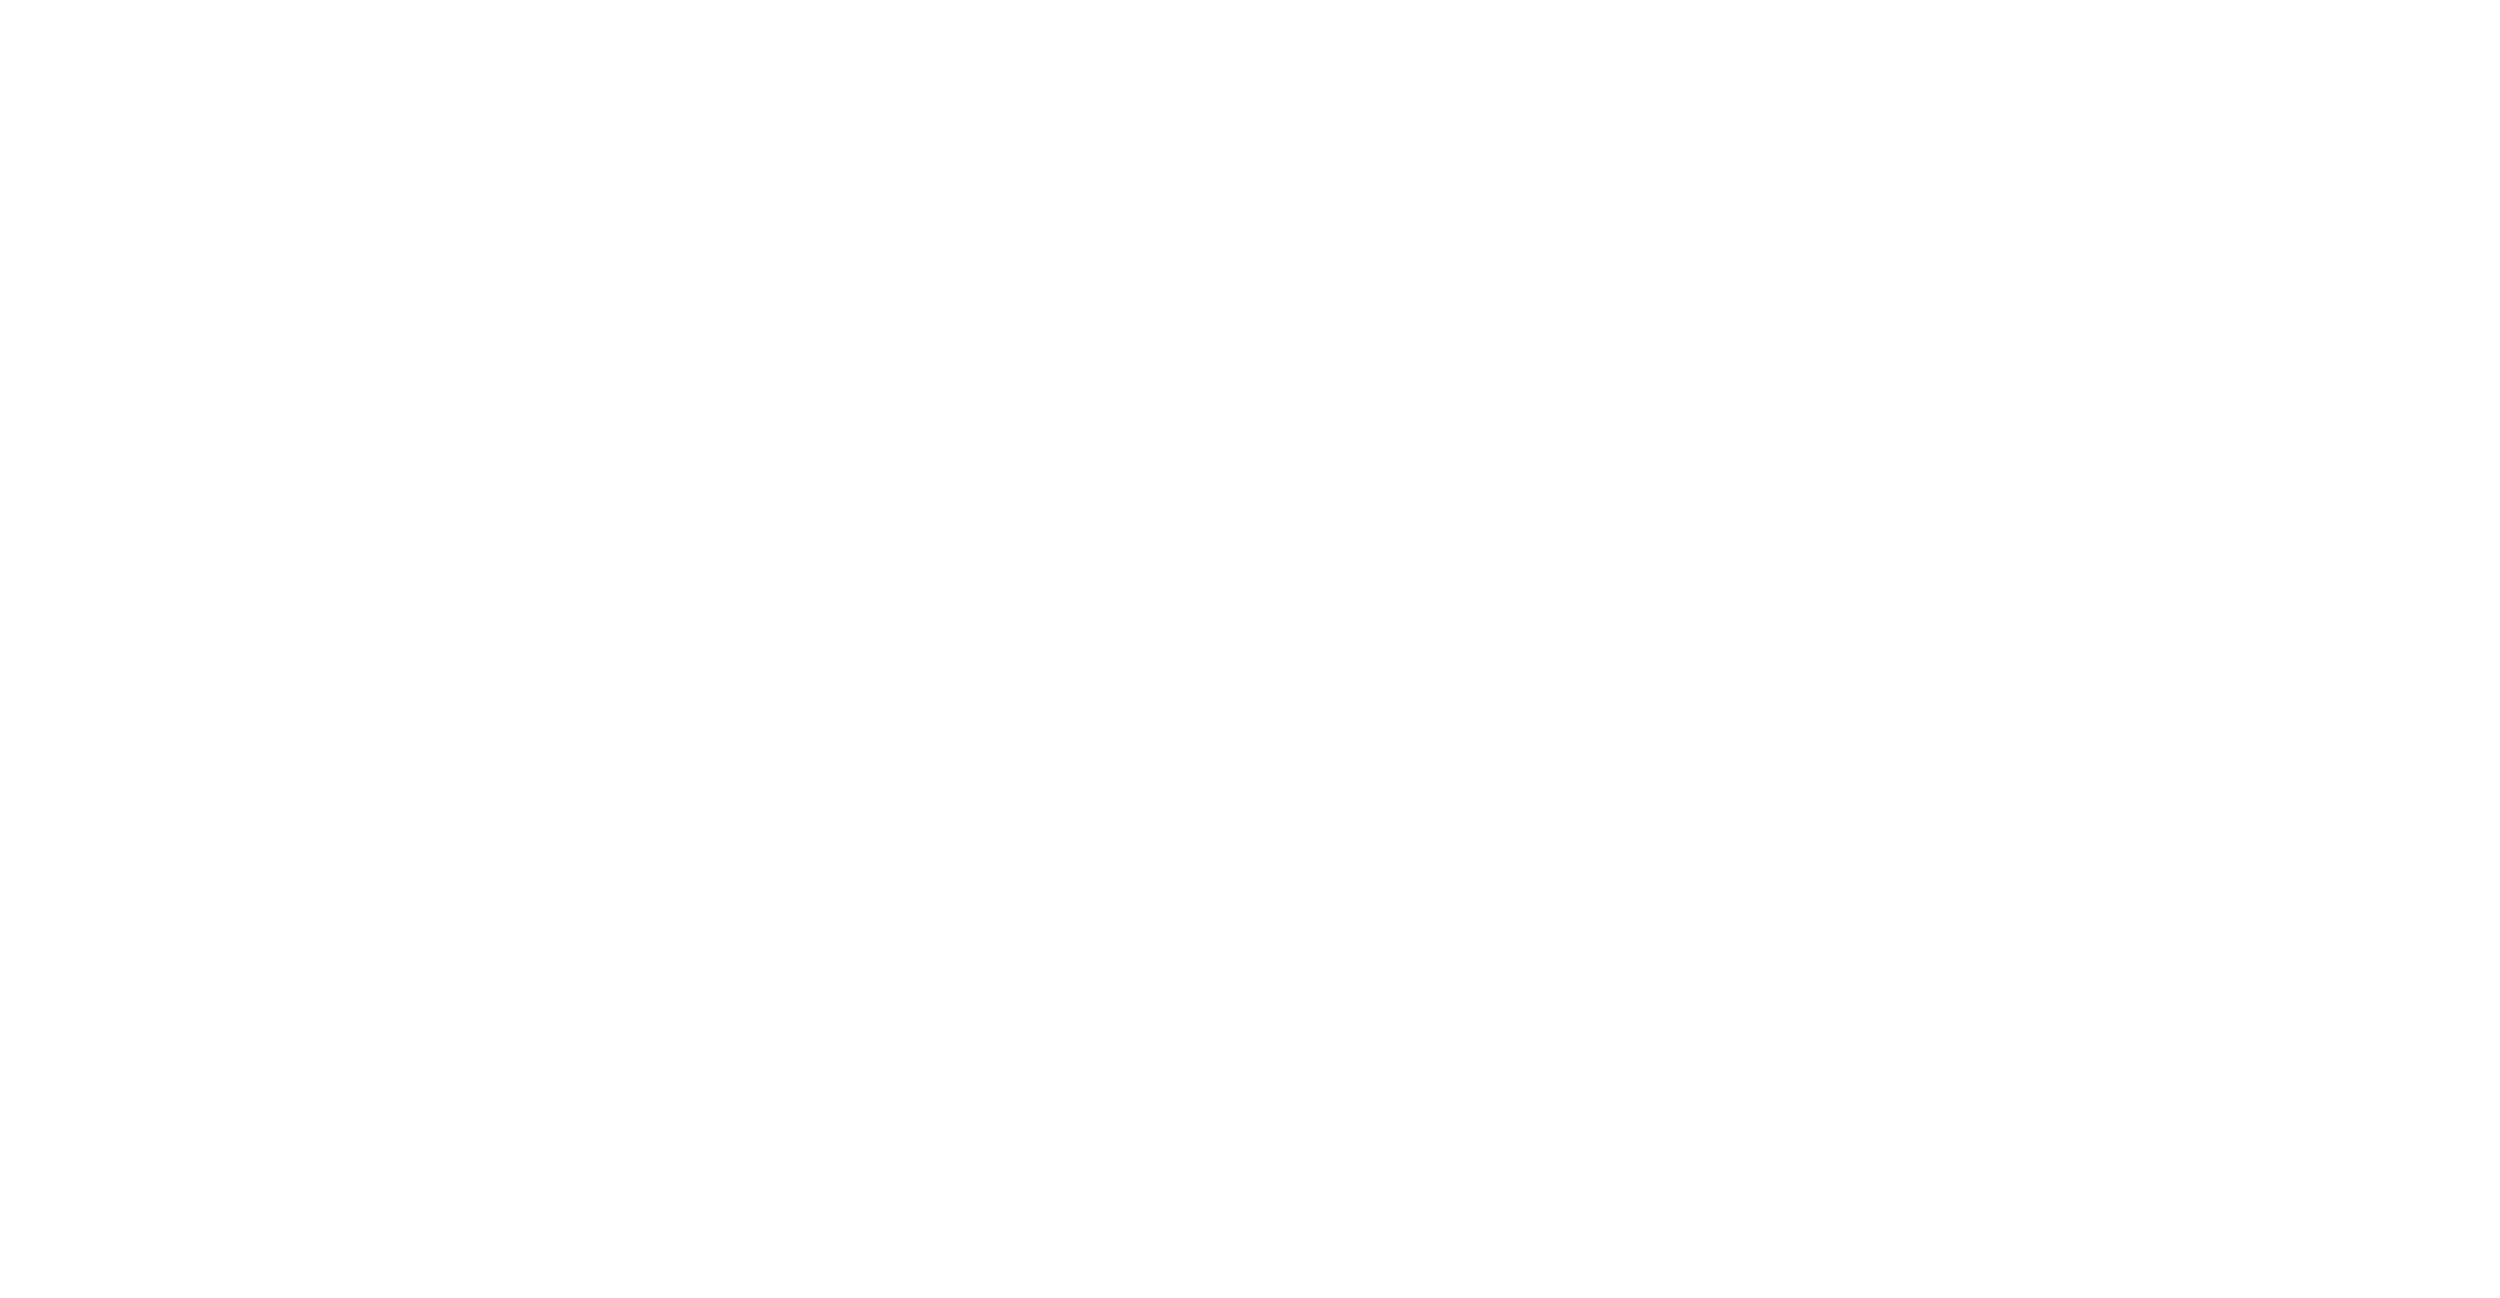 Outcomes Based Contracting